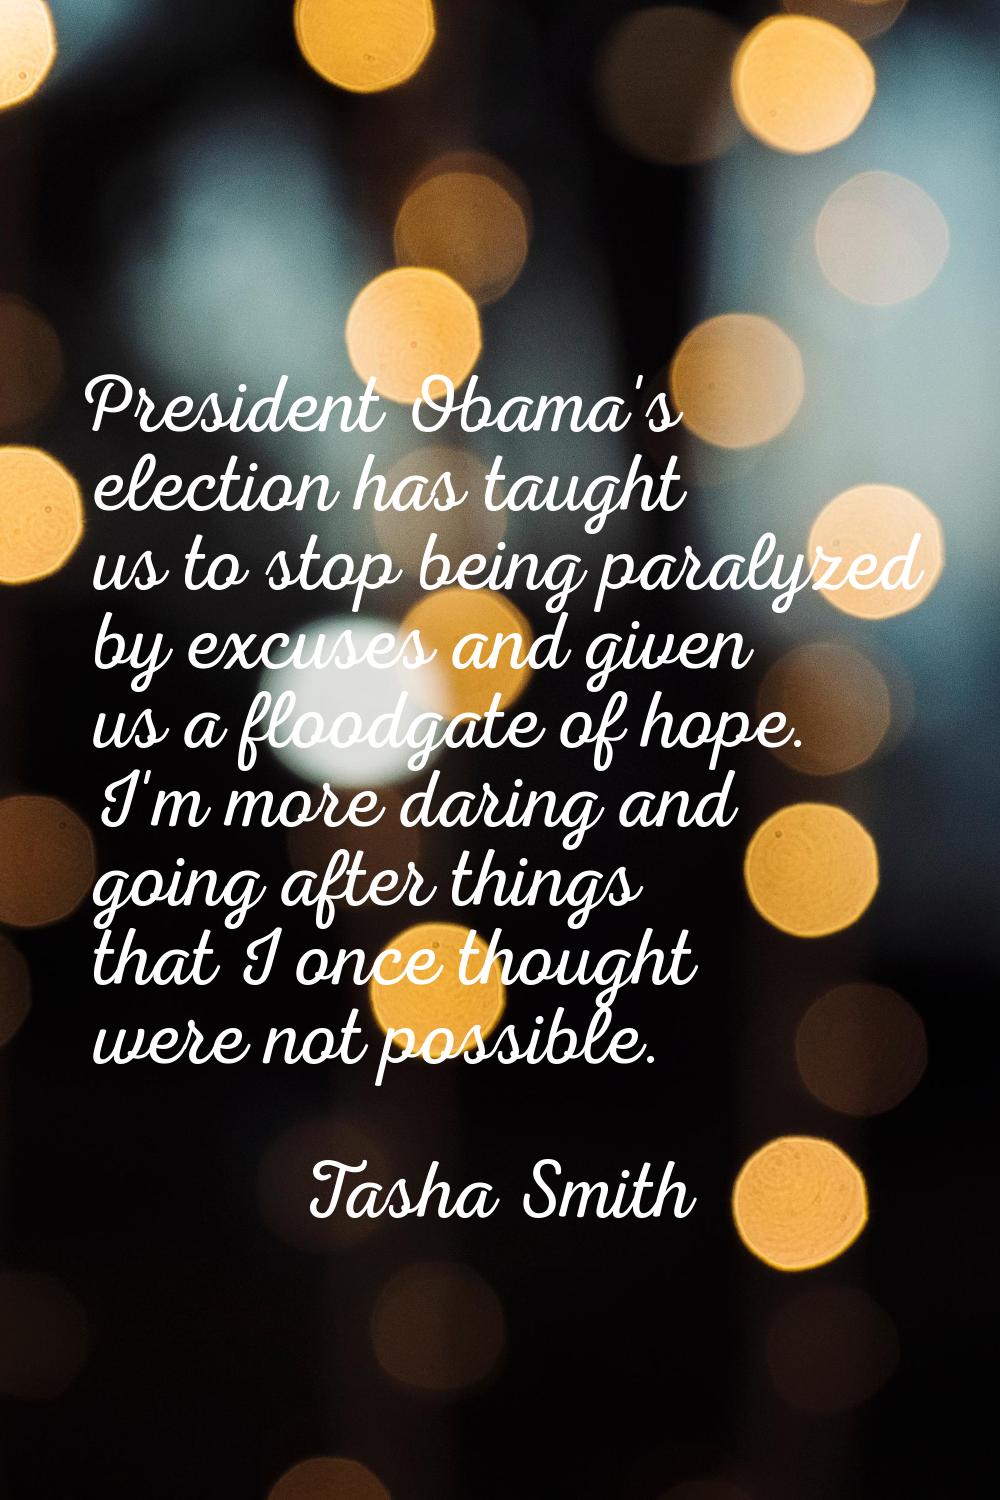 President Obama's election has taught us to stop being paralyzed by excuses and given us a floodgat